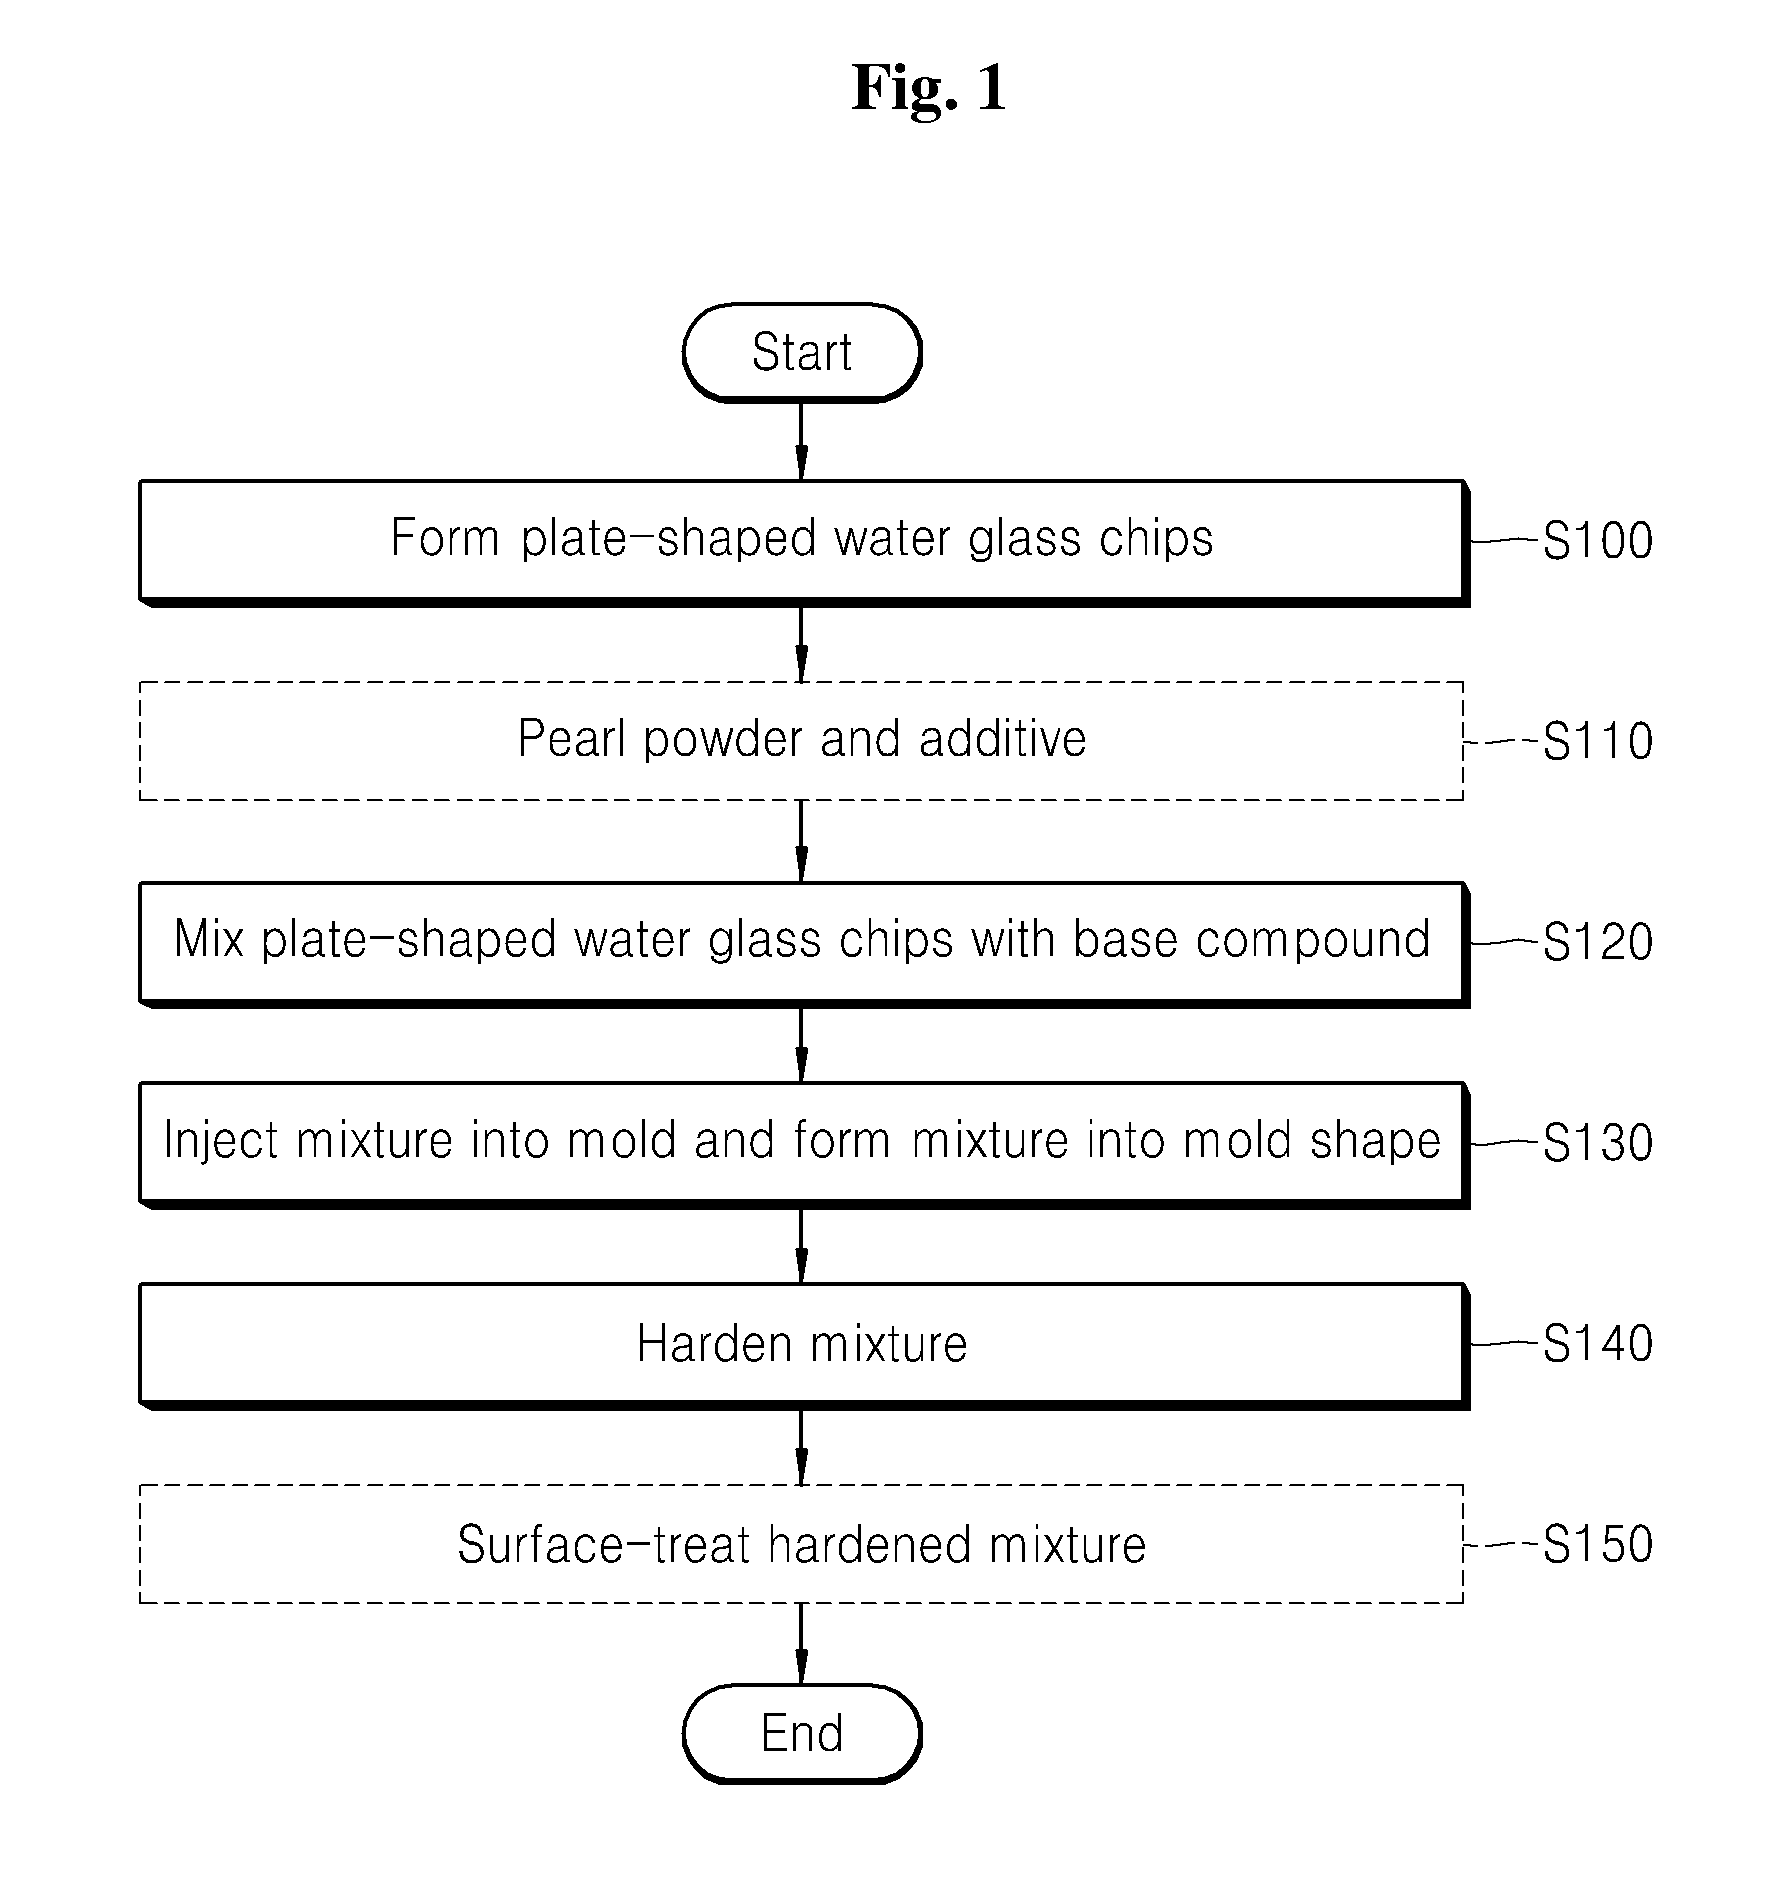 Artificial marble containing chips of plate-shaped waste glass and method for fabricating the same